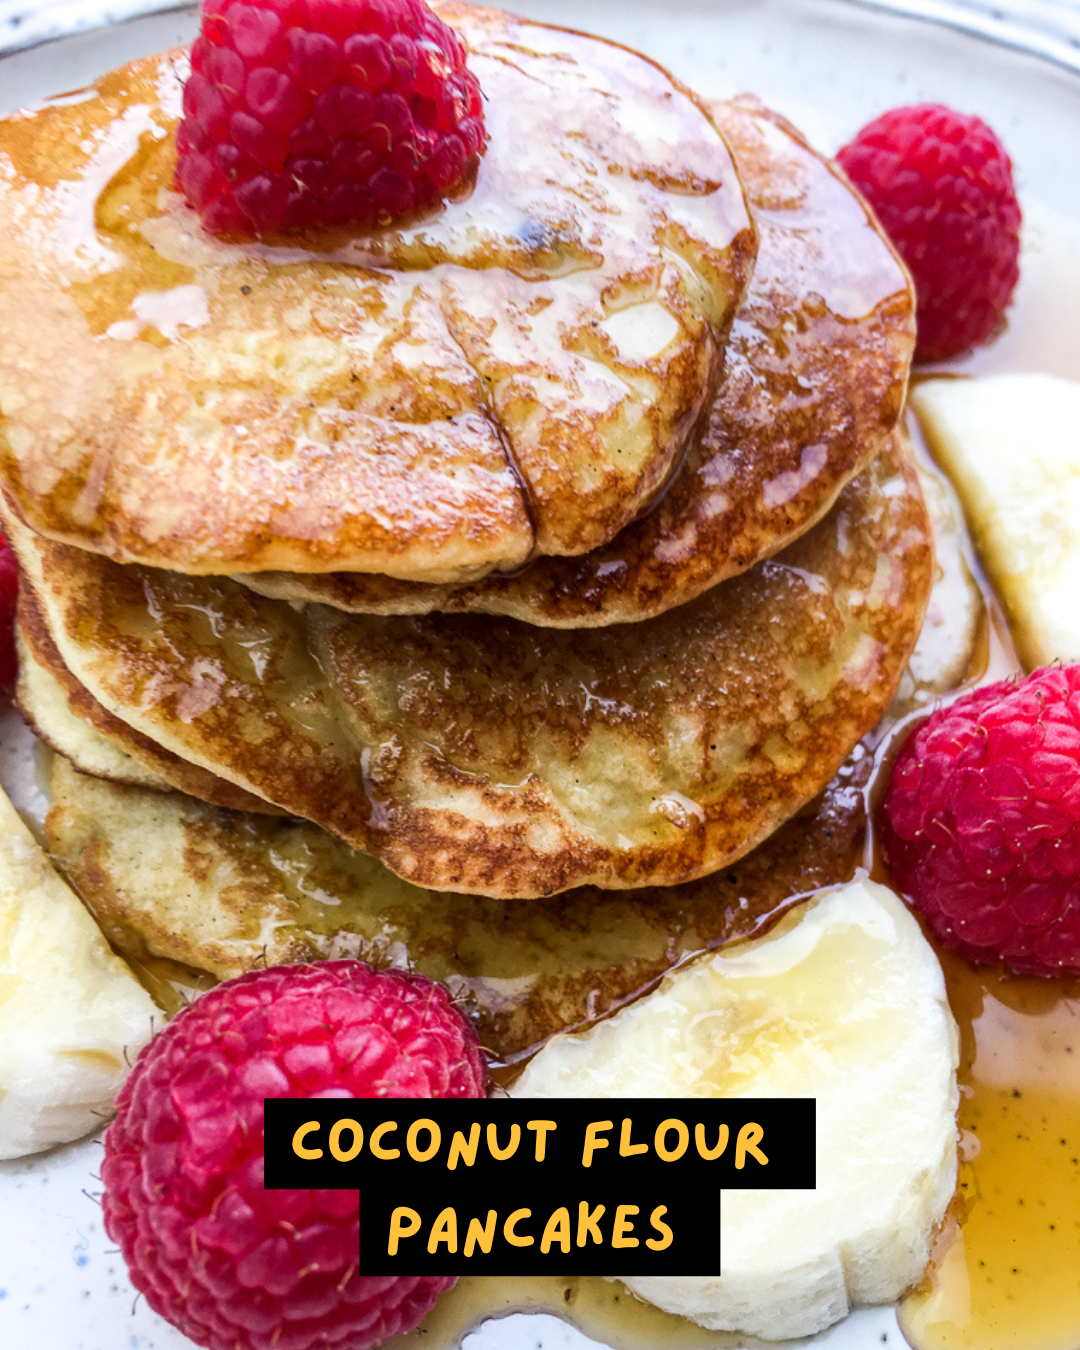 Start your day right with these fluffy coconut flour pancakes! 🌞🥥 Bursting with coconut flavor, these pancakes are the ultimate breakfast treat. Easy to make and oh-so-delicious, they’re perfect for a weekend brunch or a cozy morning at home. 😋🥞 #BreakfastDelight #CoconutLove